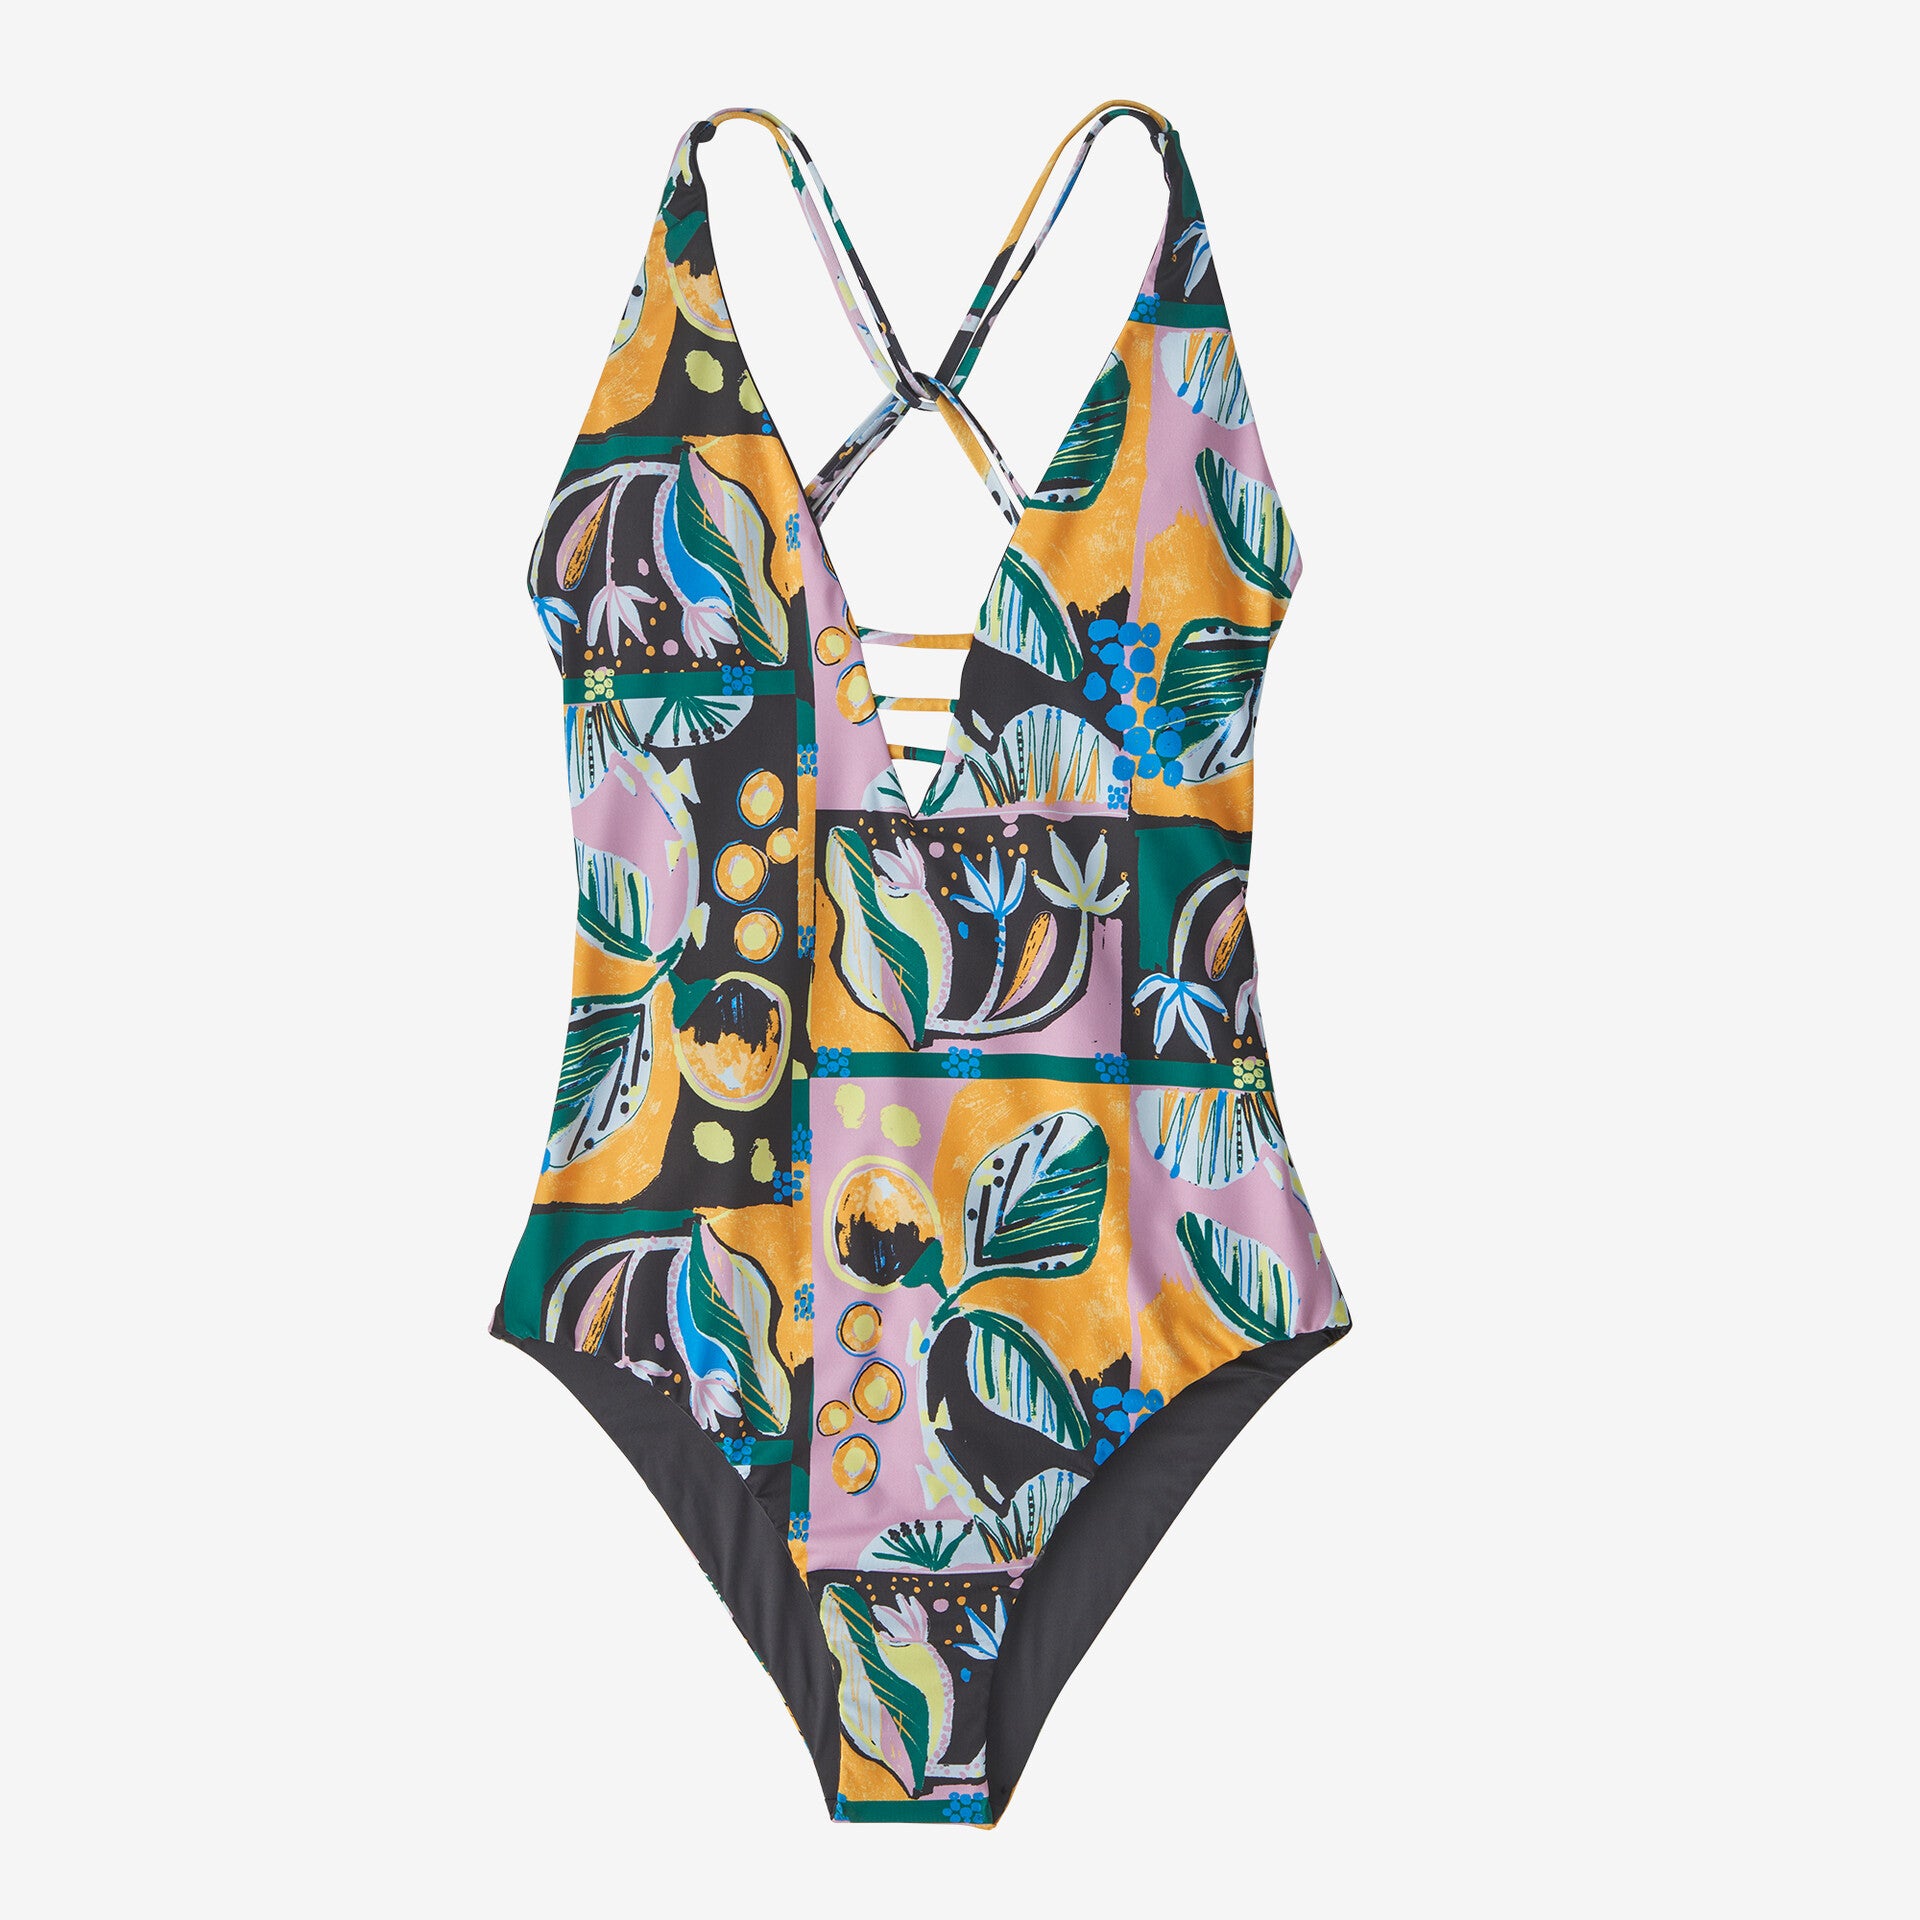 Patagonia Women's Reversible Extended Break One-Piece Swimsuit